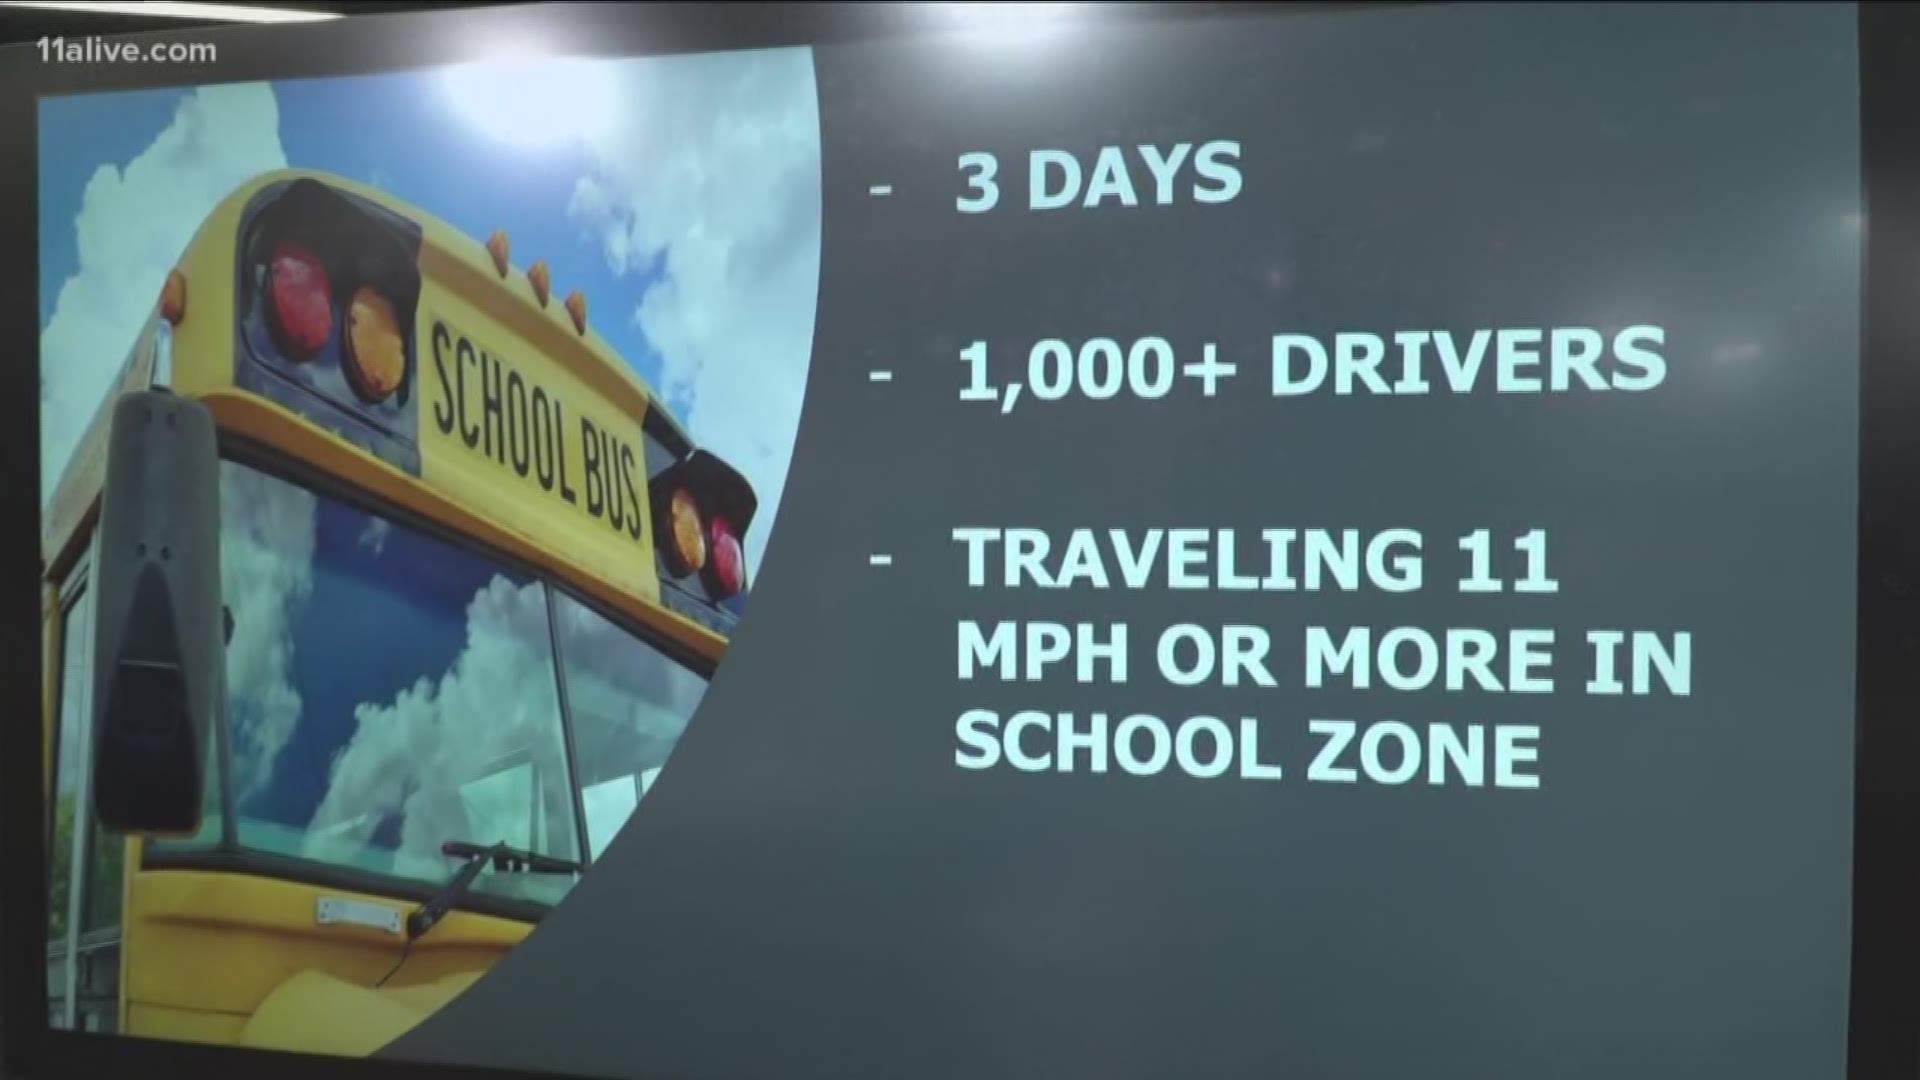 Deputies in Pickens County found that over a 3-day period, more than 1,000 drivers were driving 11 mph or more through school zones in the county.